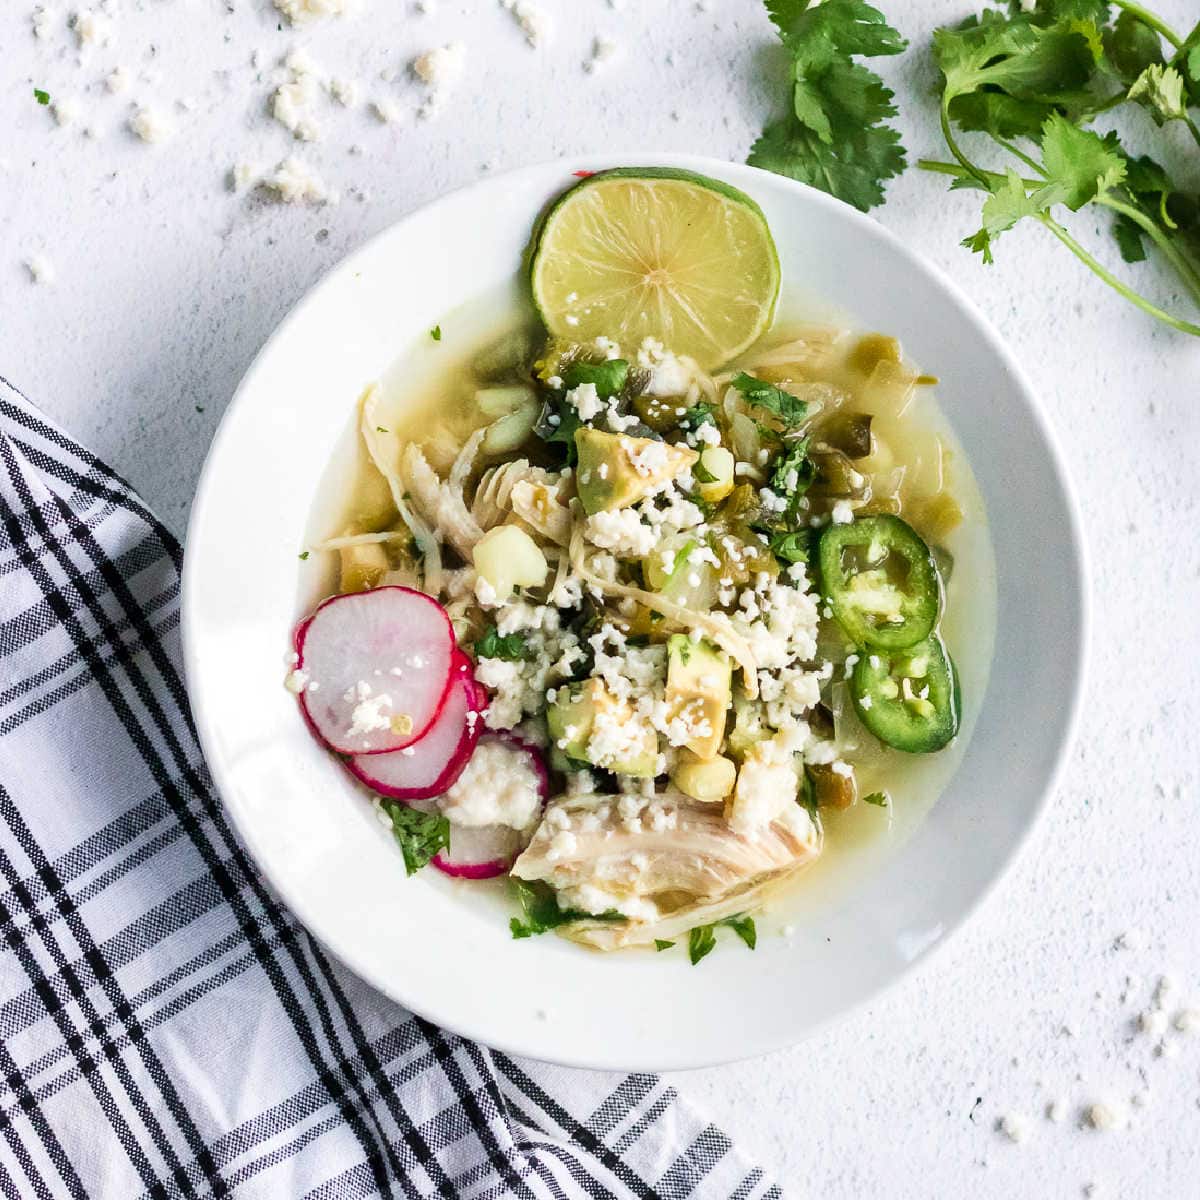 Try Pozole Verde for a summertime meal